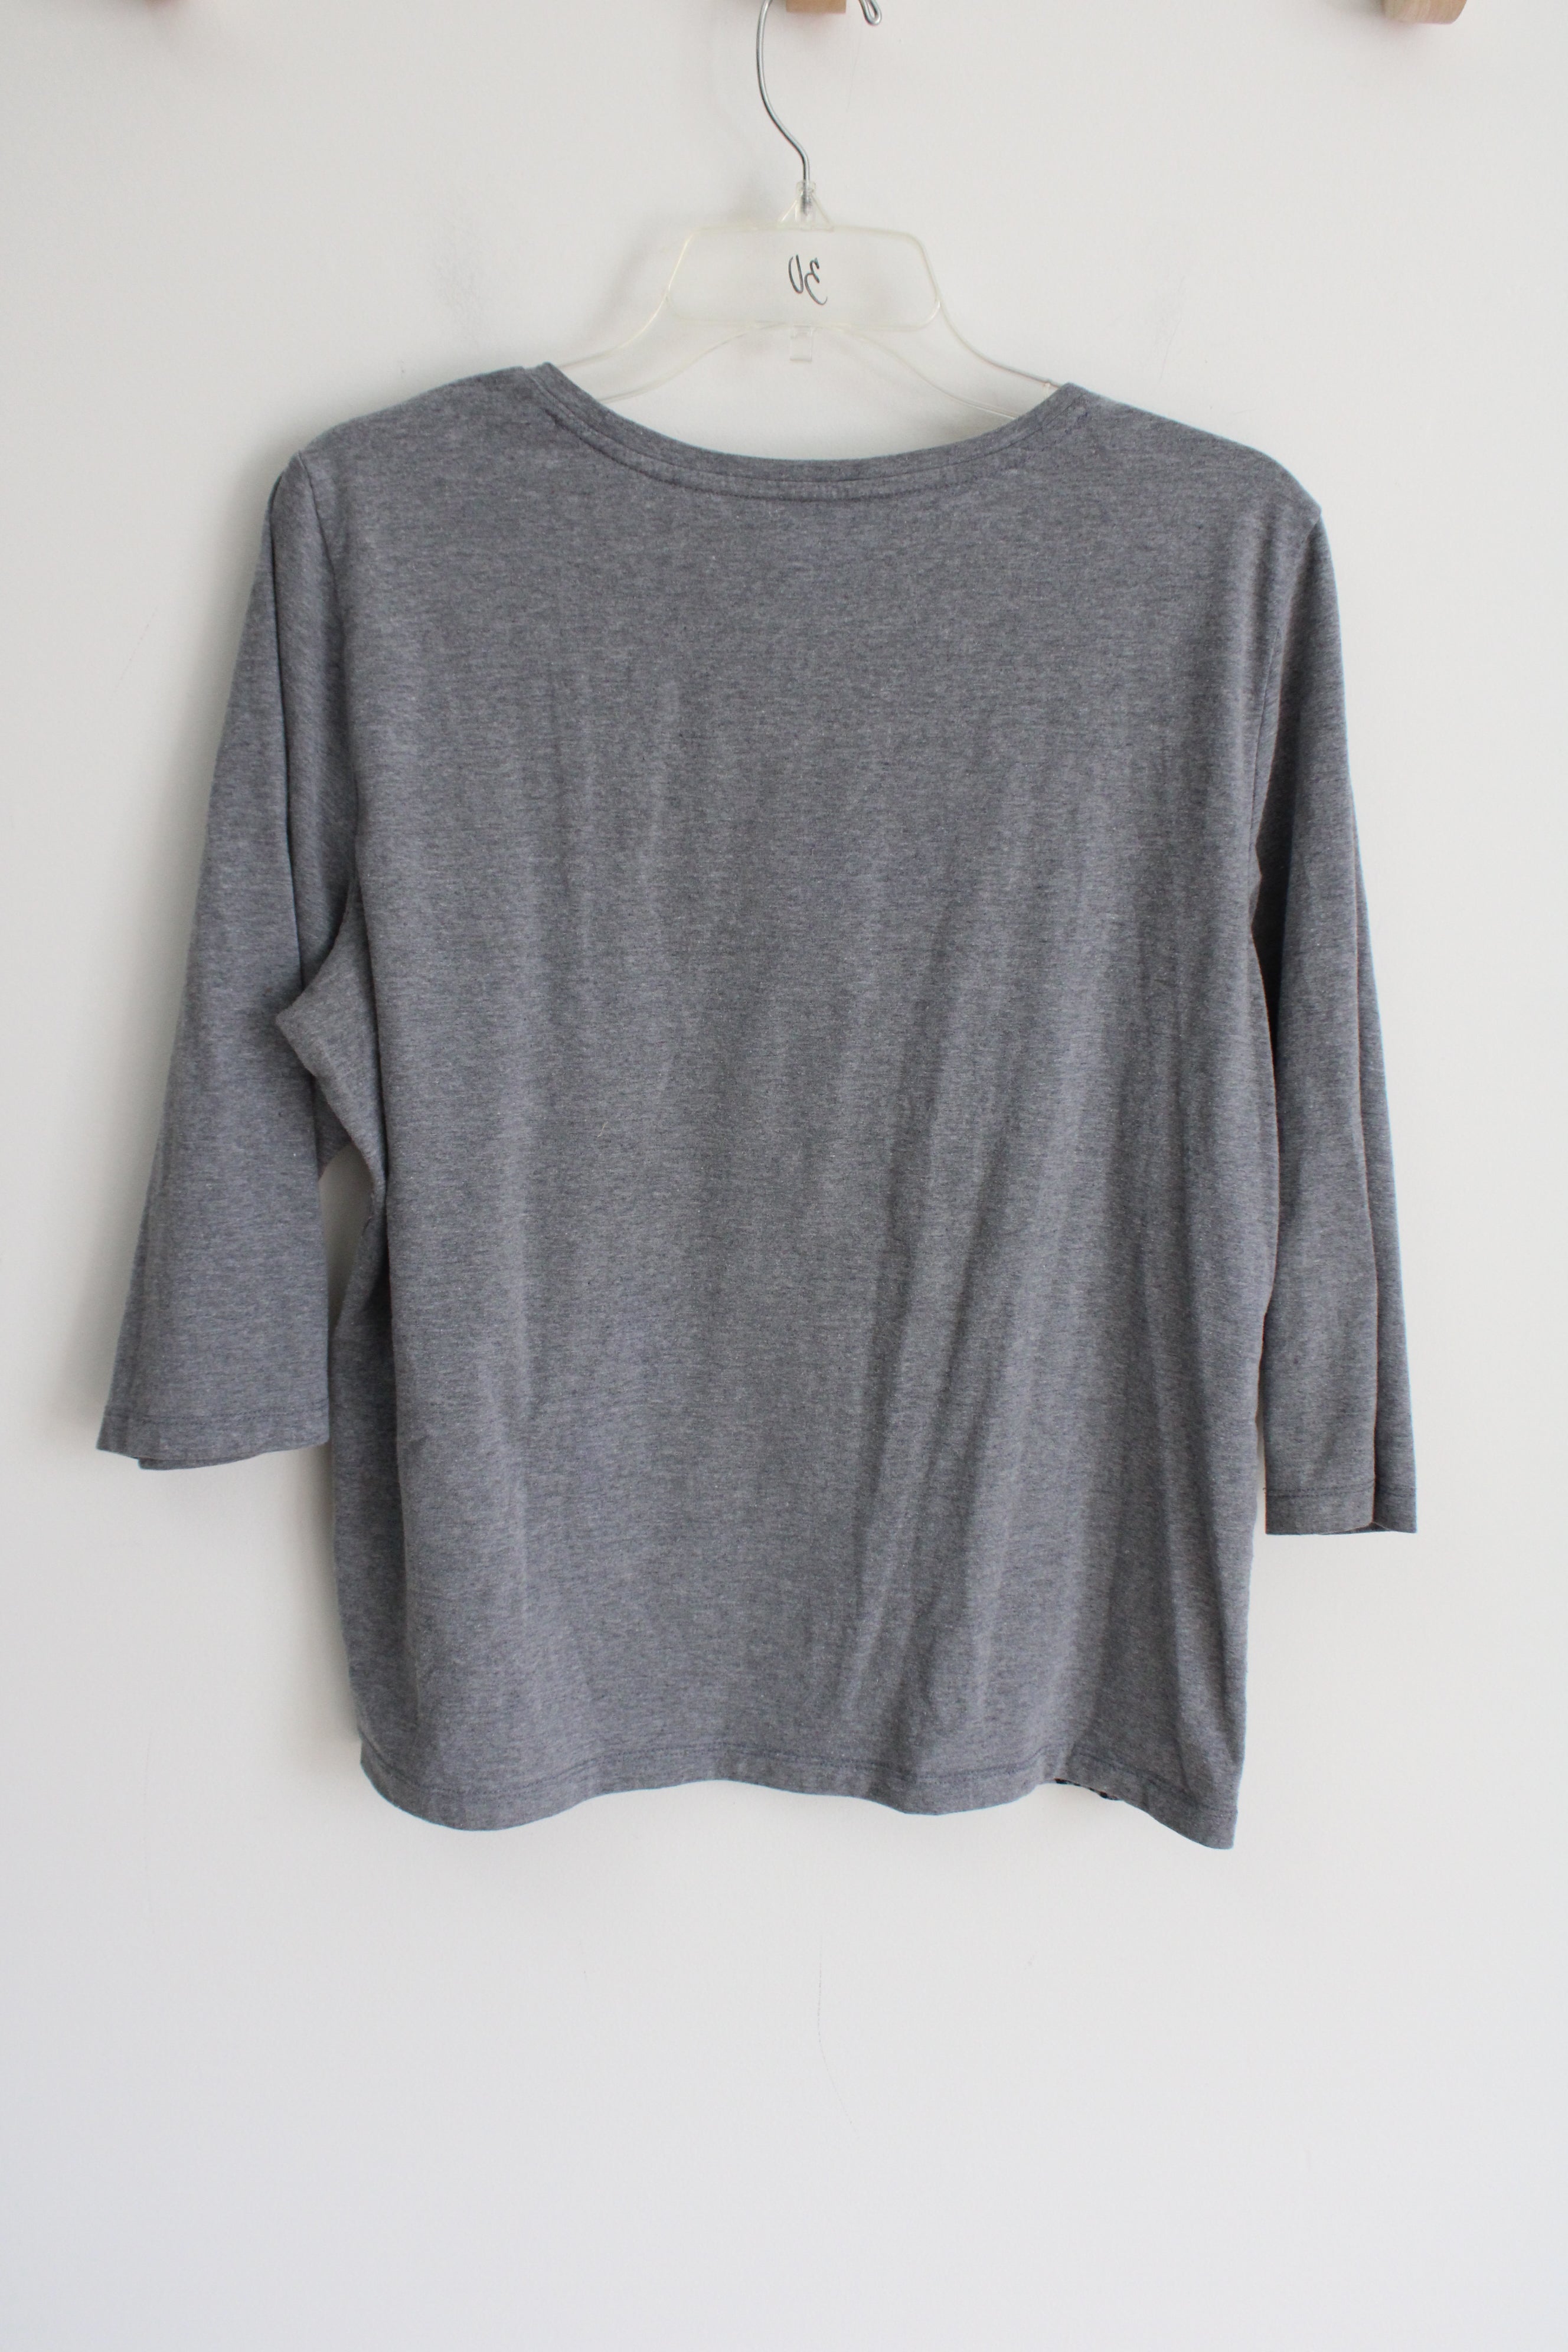 Christopher & Banks Gray Patterned Top | L Petite